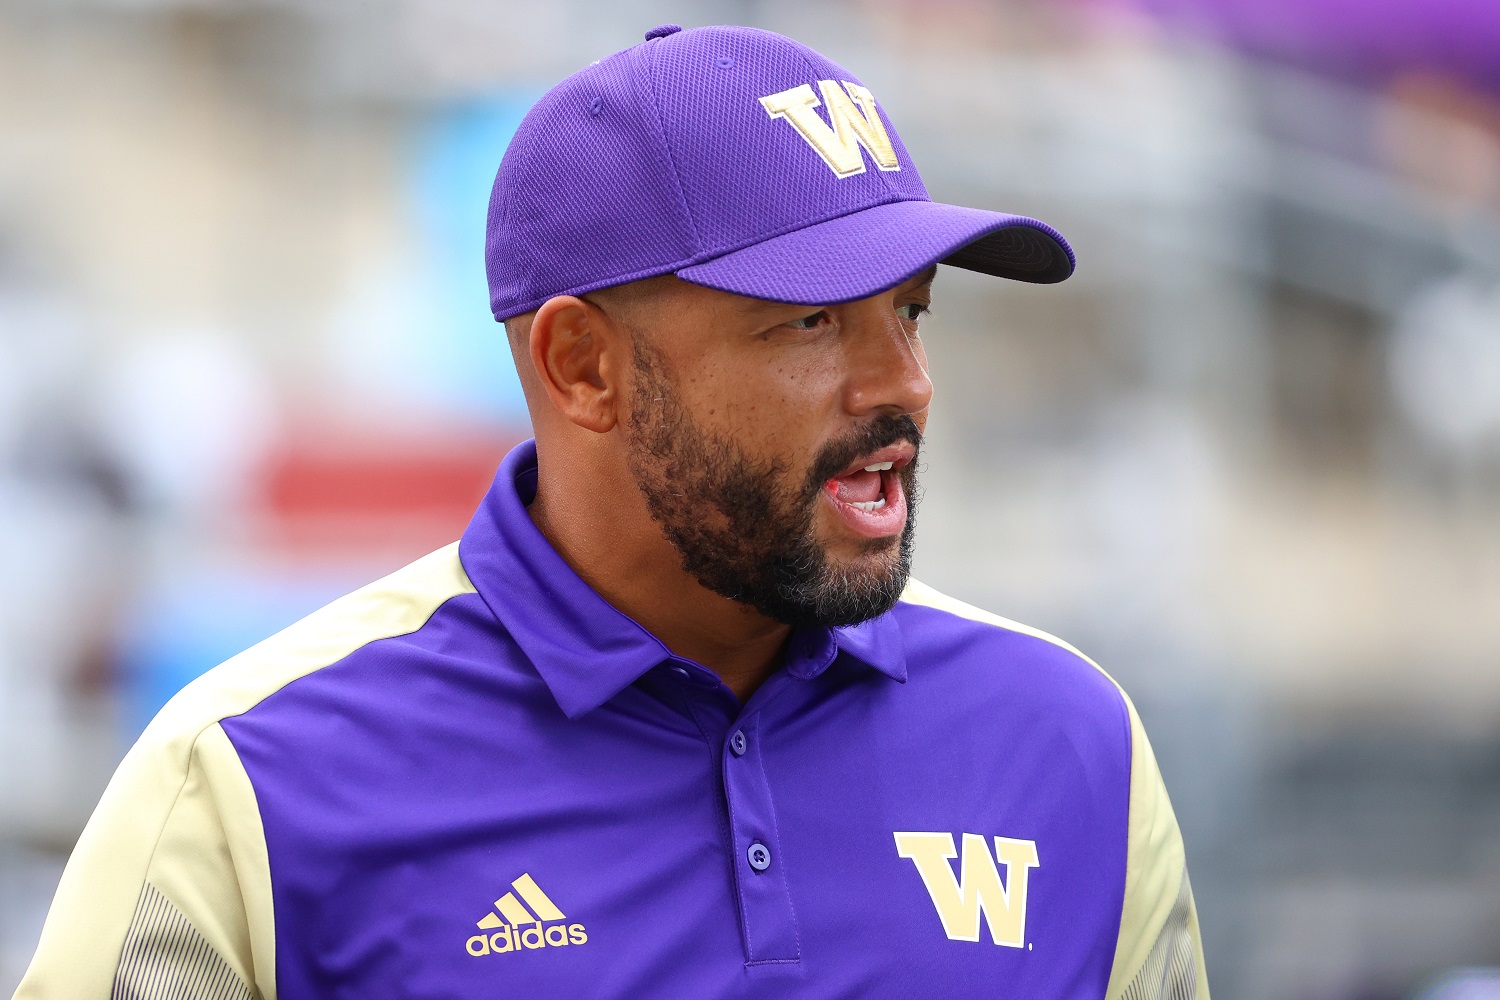 Head coach Jimmy Lake of the Washington Huskies looks on before the game against Arkansas State on Sept. 18, 2021 in Seattle.